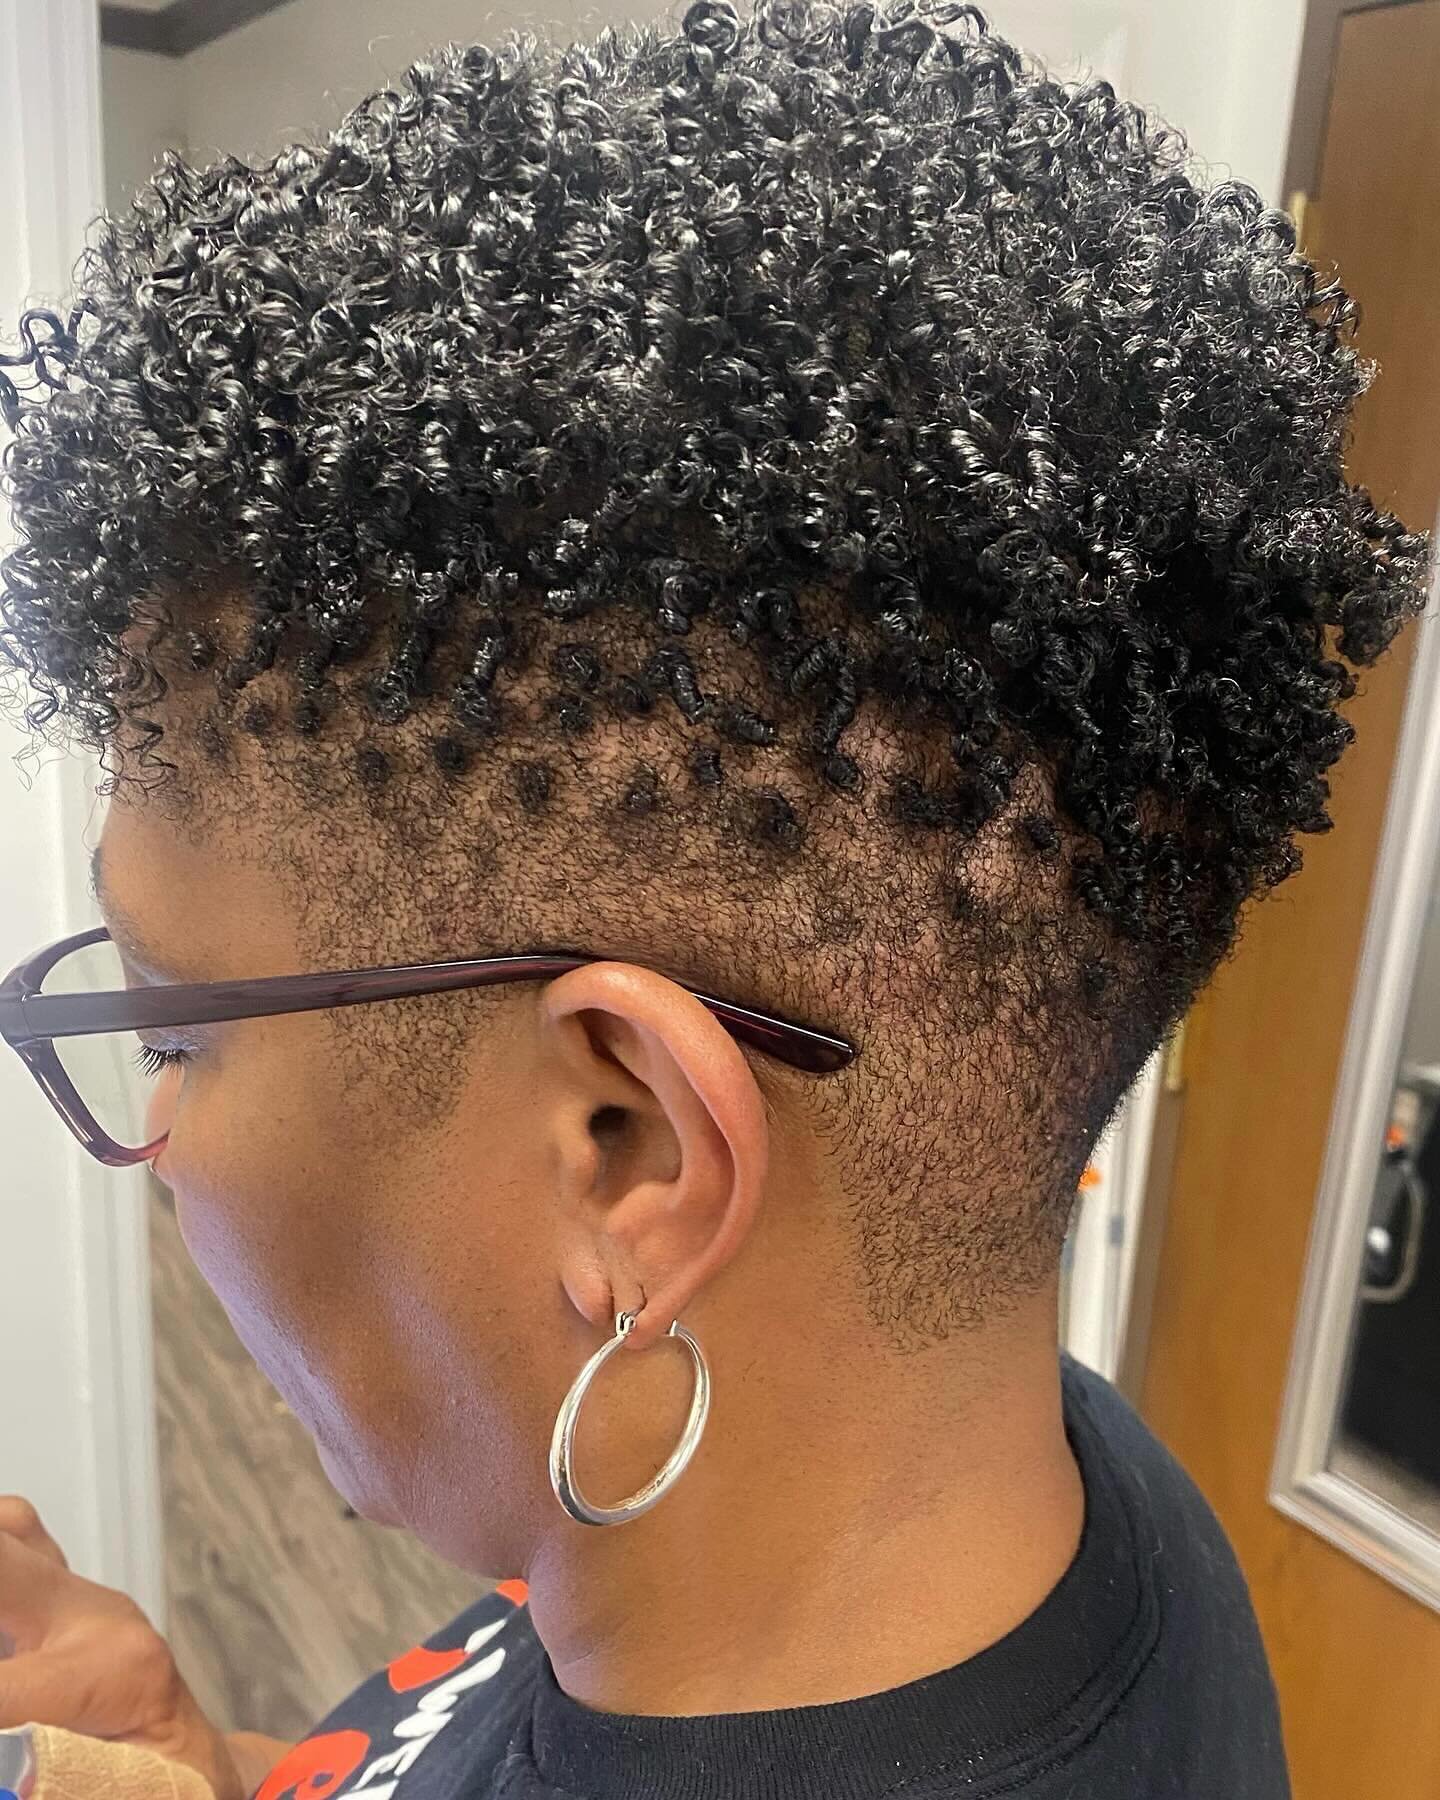 QUIZ TIME! What styling method did I use to get @gfitz72 curls up top? $10 cash app to the first correct answer! 
A. Wash &amp; Go
B. Coffee straw set
C. Twist Out
.
#washngo #twistout #flattwistout #strawset #taperednaturalhair #taperedcut #taperedg